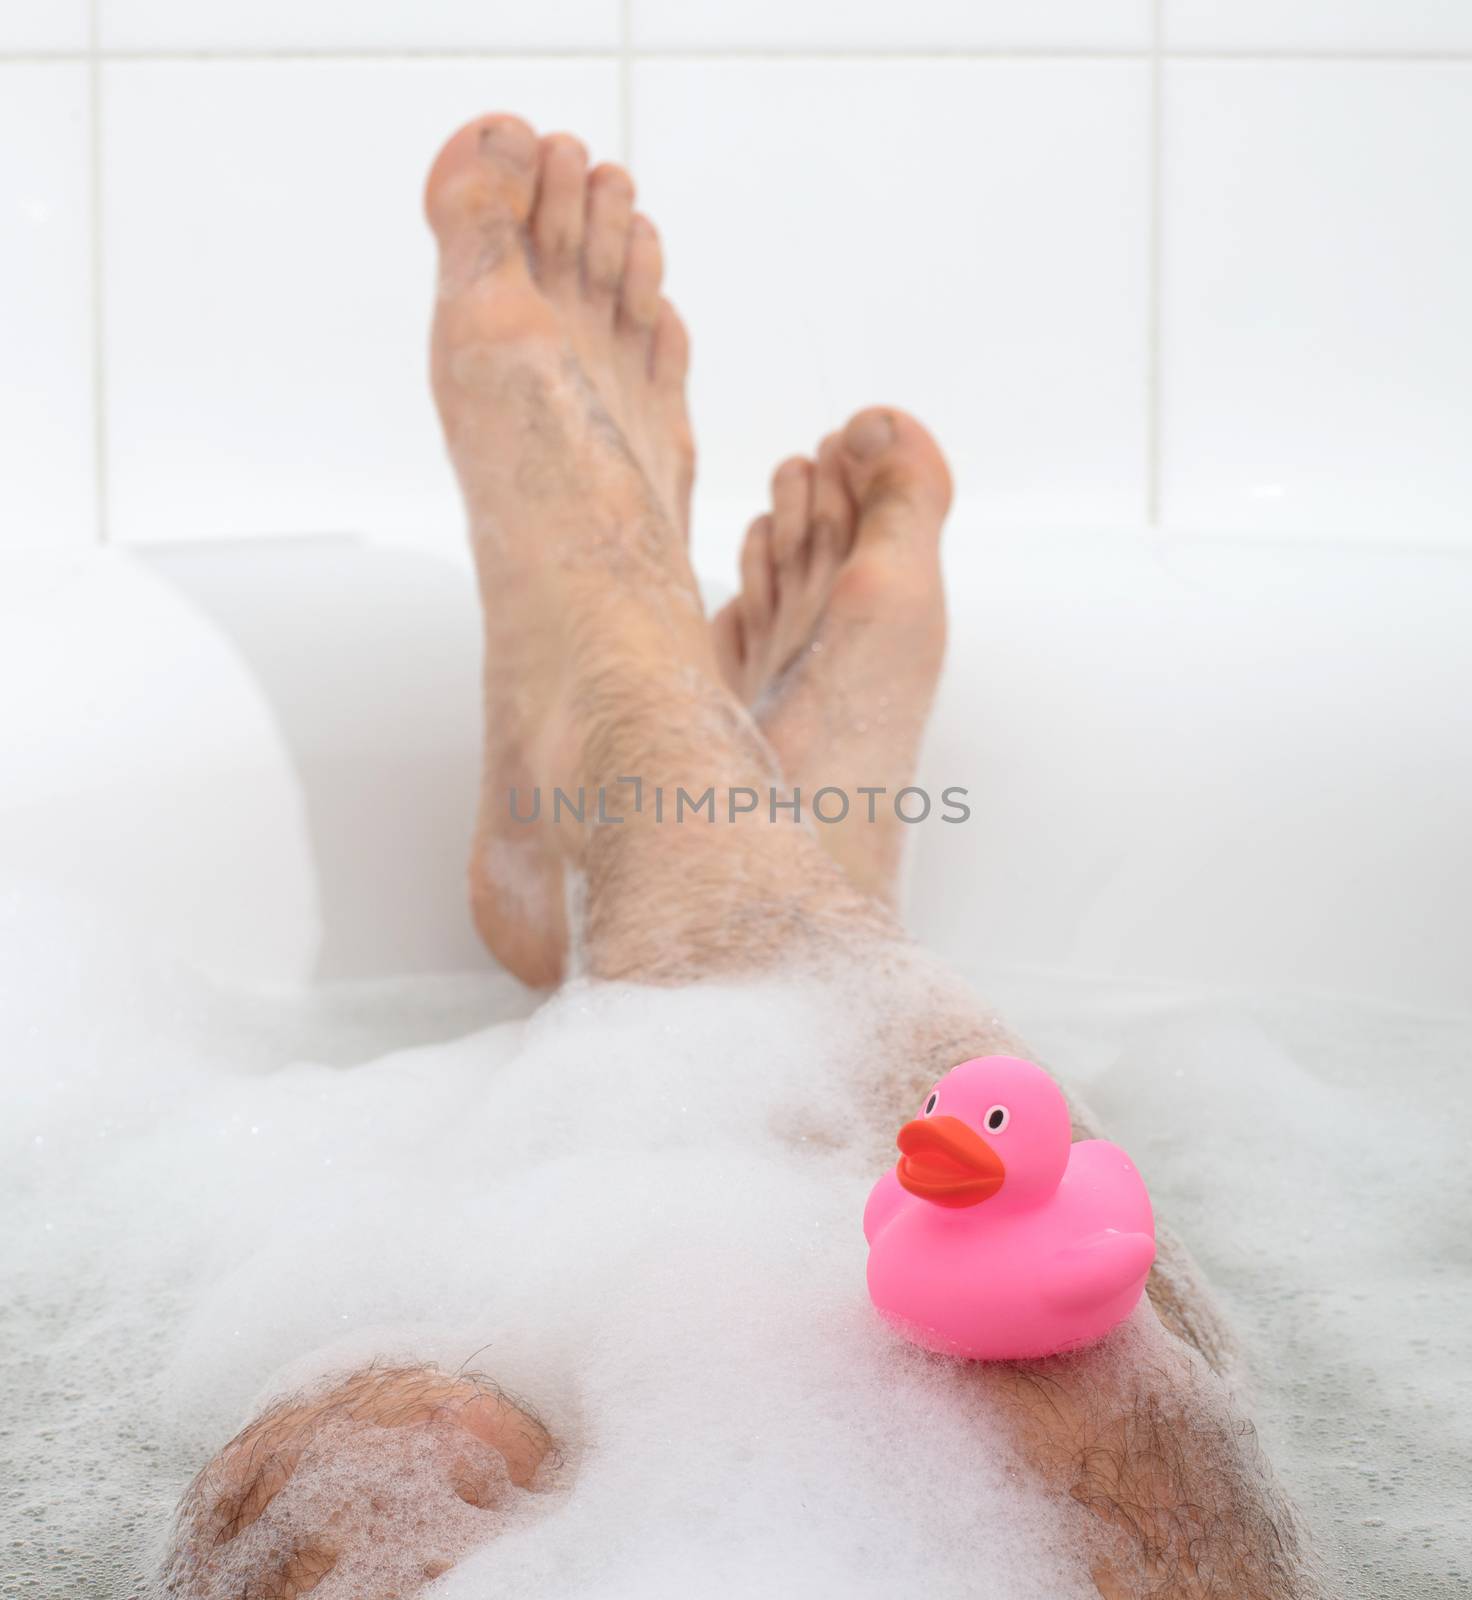 Men's feet in a bright white bathtub, selective focus on toes